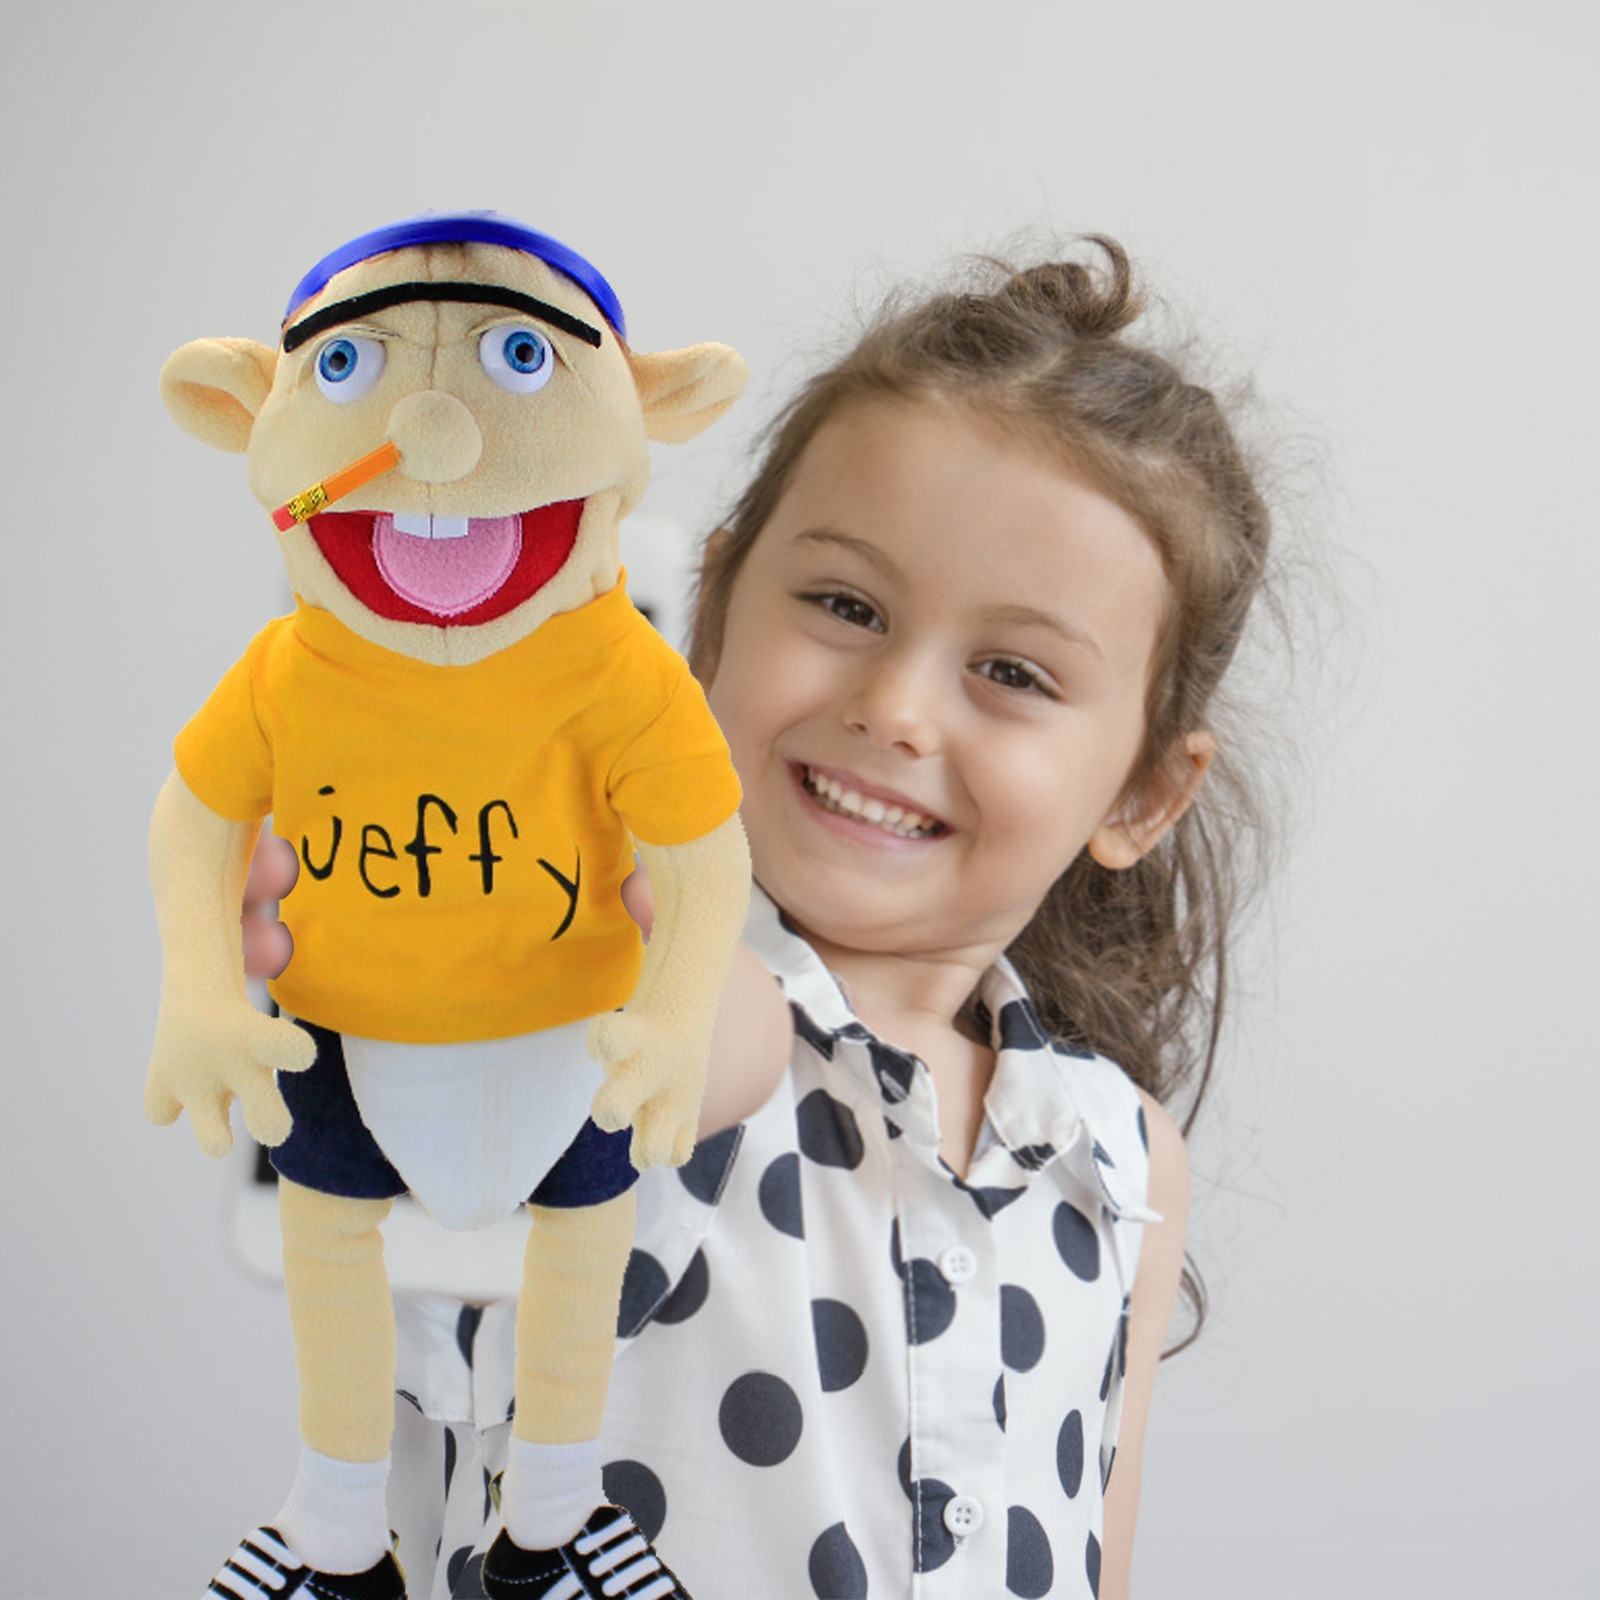 JEFFY HAND PUPPET Plush- Perfect For Storytelling Games And Gifting On  Christmas $20.22 - PicClick AU